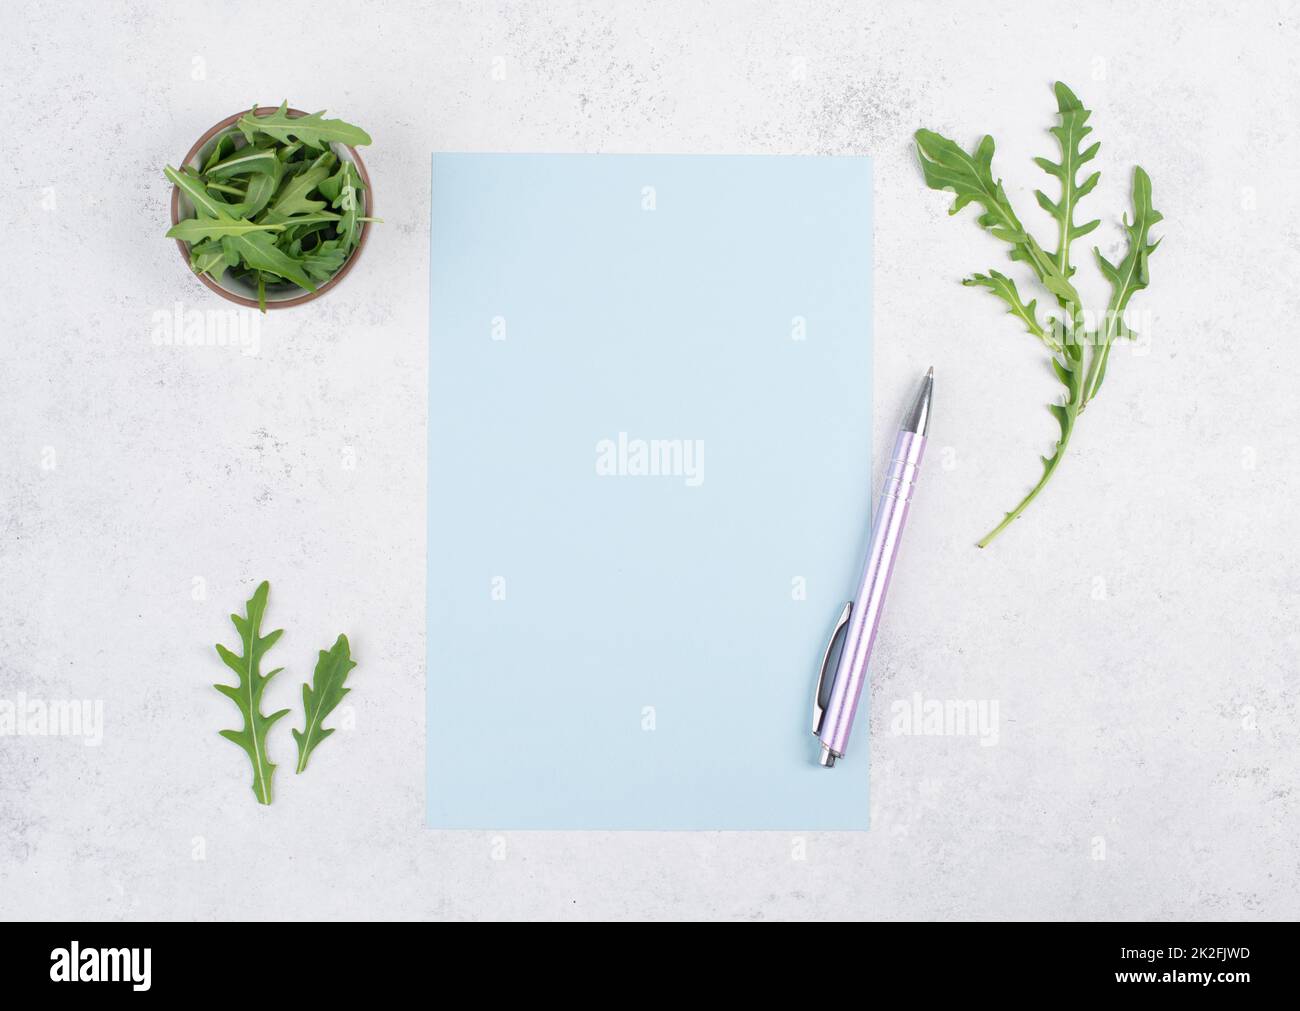 Blank colored paper with a pen, arugula salad leaves, copy space for text, recipe for cooking, preparing food, healthy lifestyle, diet Stock Photo